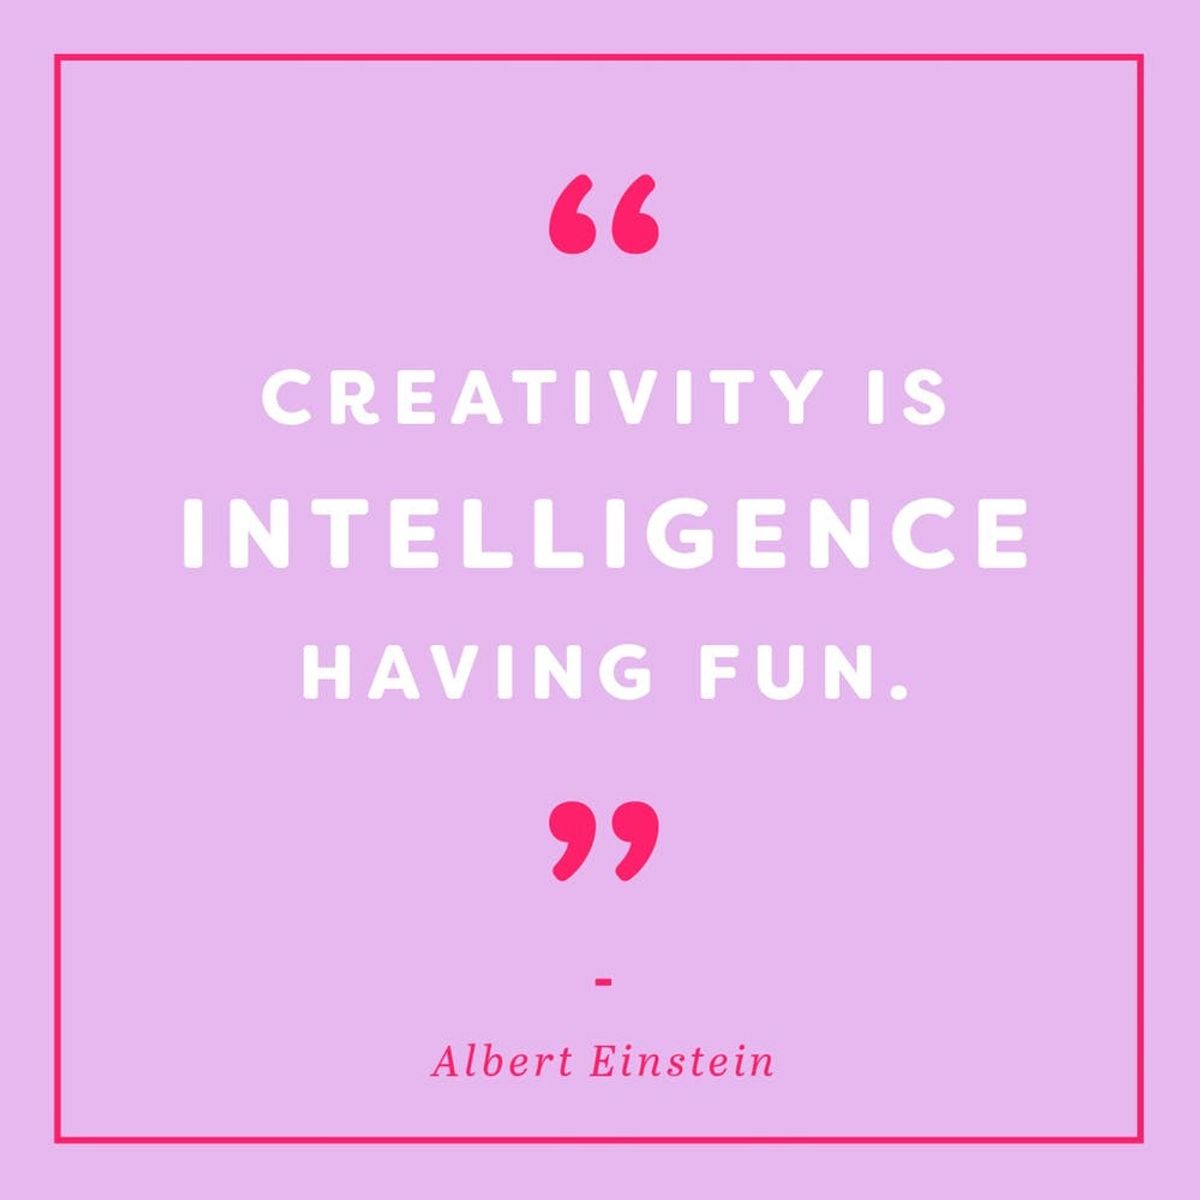 10 Creativity Quotes to Kick Off Your Year